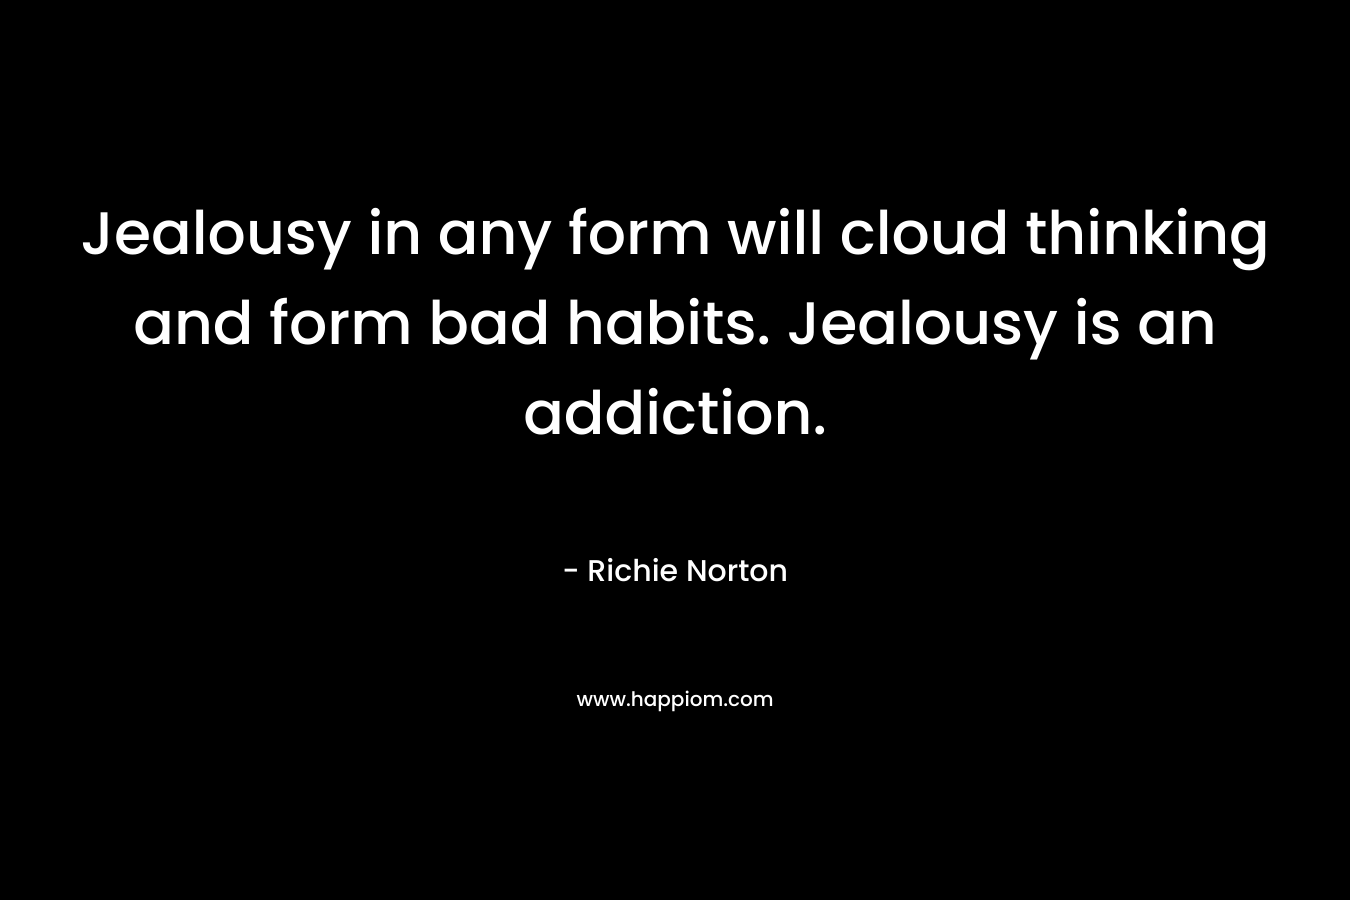 Jealousy in any form will cloud thinking and form bad habits. Jealousy is an addiction.